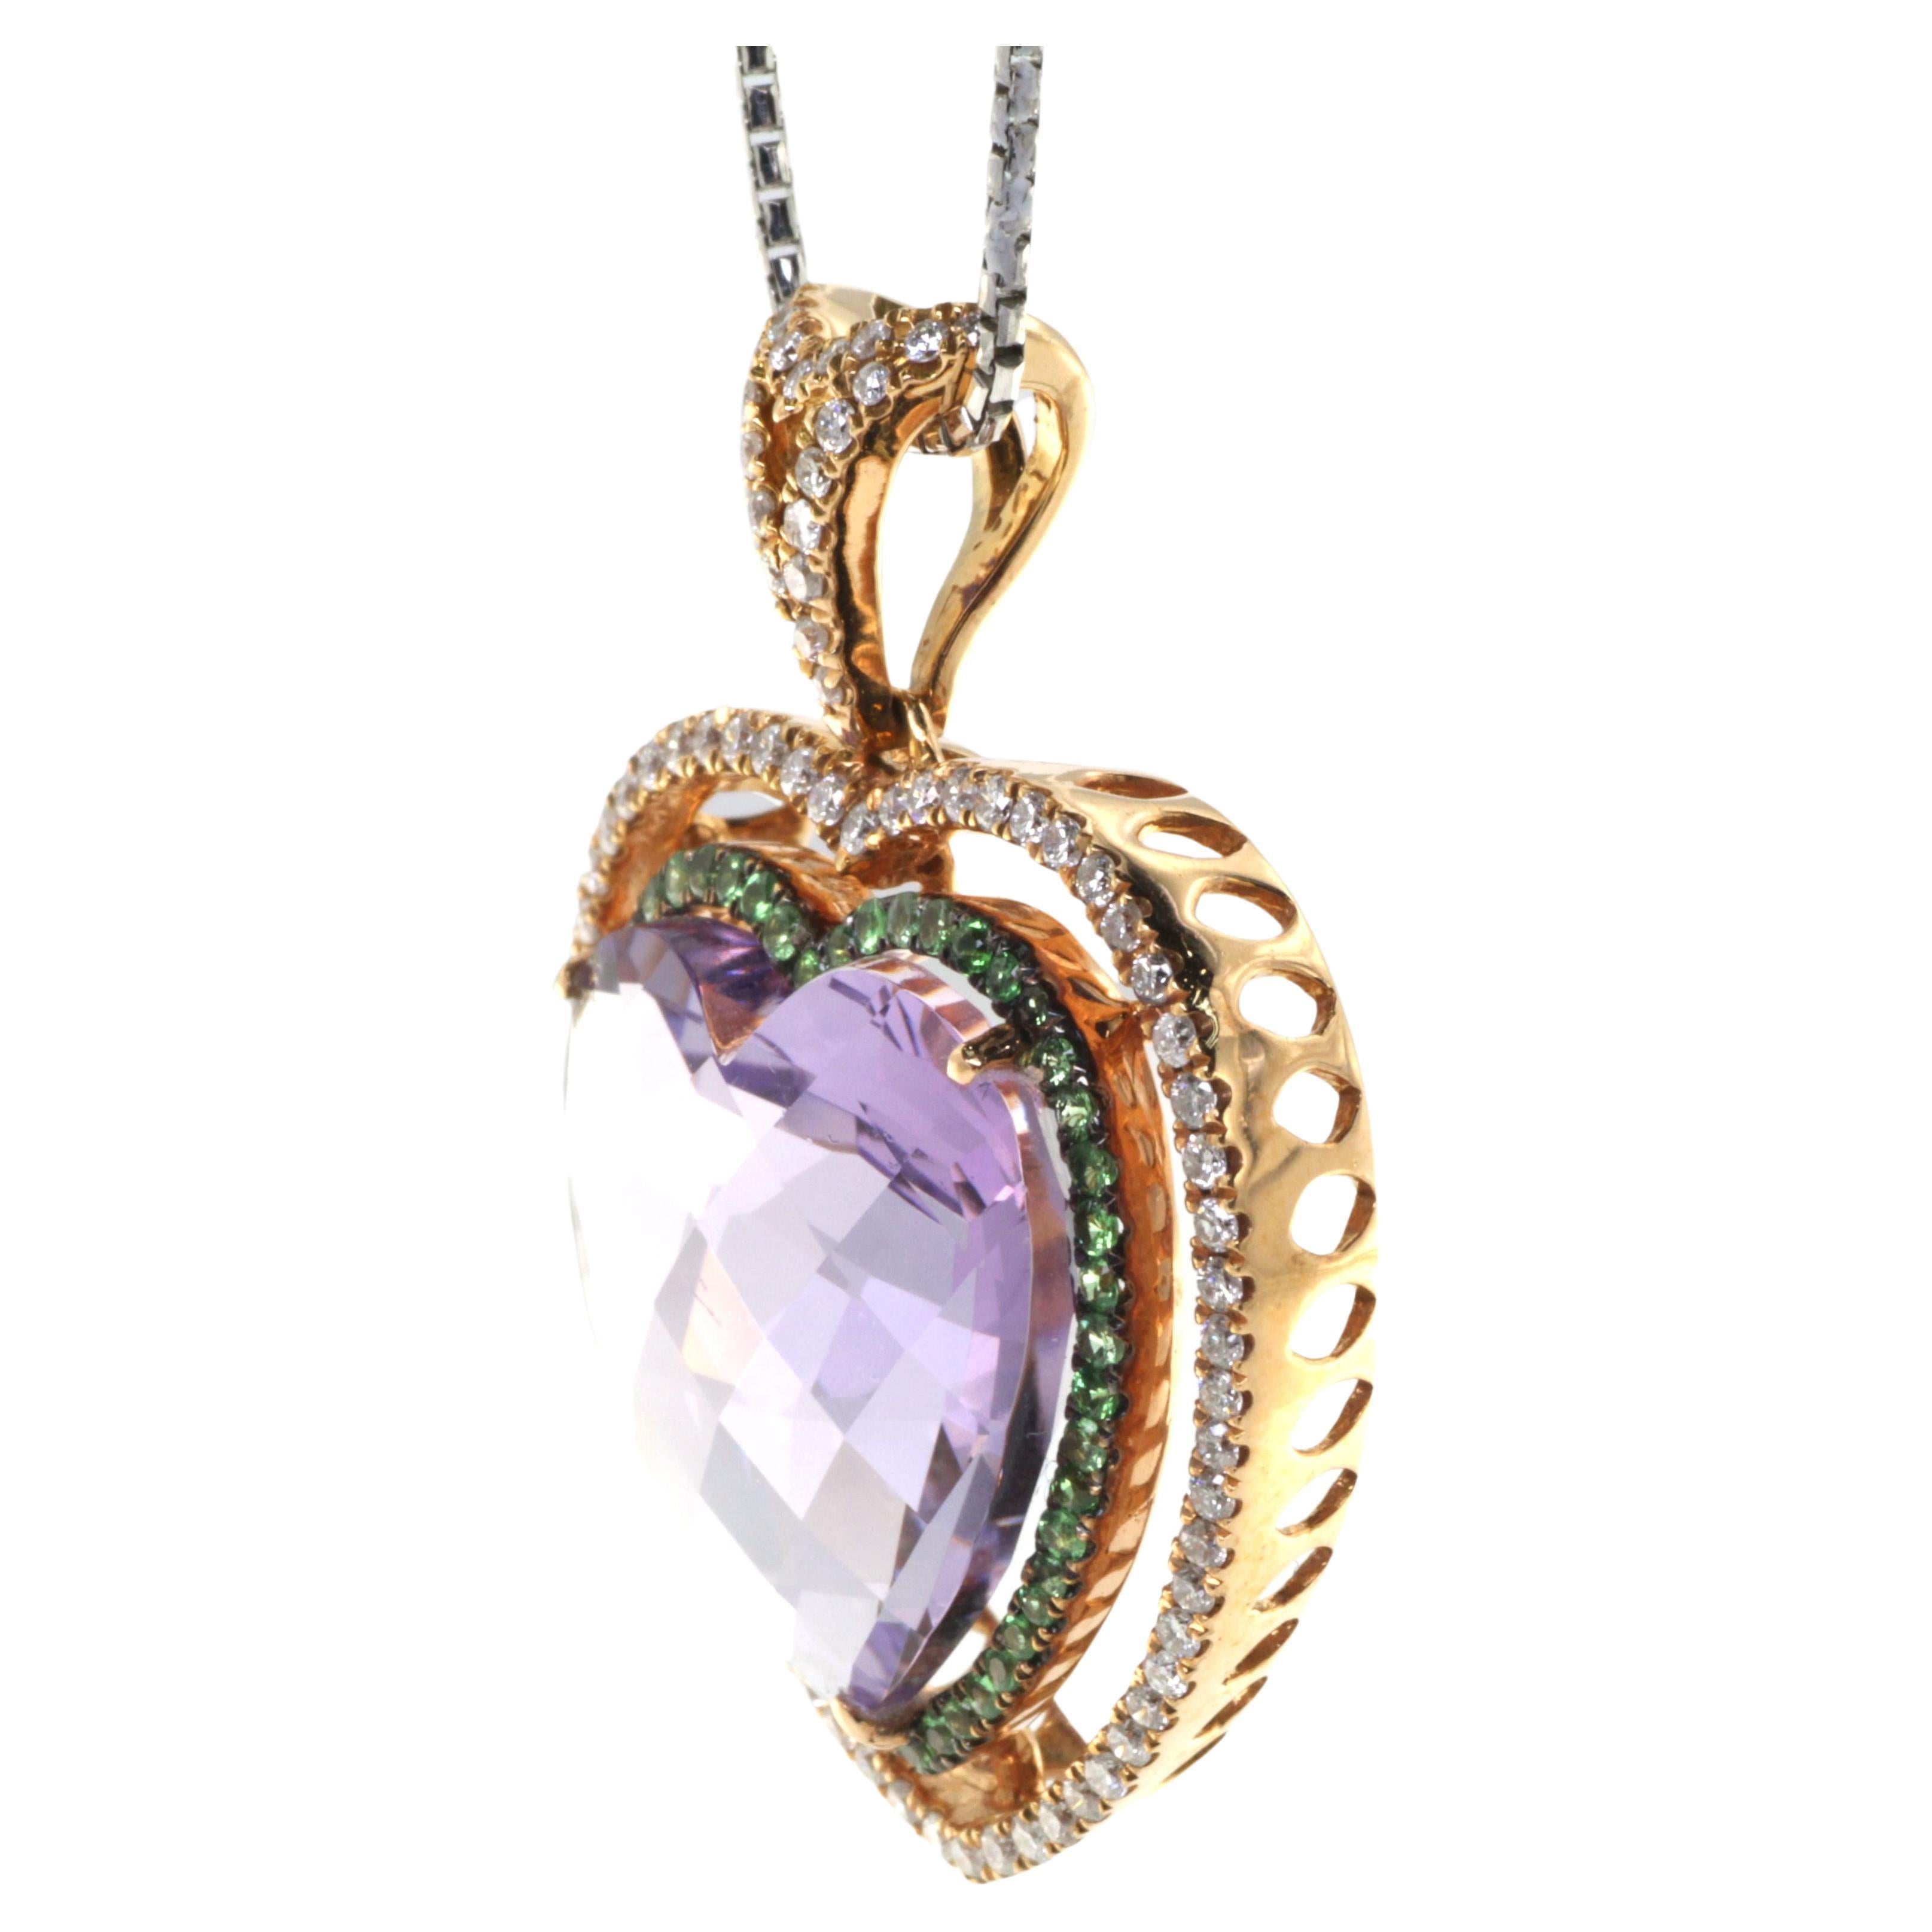 Presenting our stunning Amethyst, Tsavorite, and Diamond Pendant, a vibrant and elegant piece of jewelry that blends exquisite craftsmanship with beautiful gemstones. This pendant is a fine blend of colorful allure and shining luxury that promises